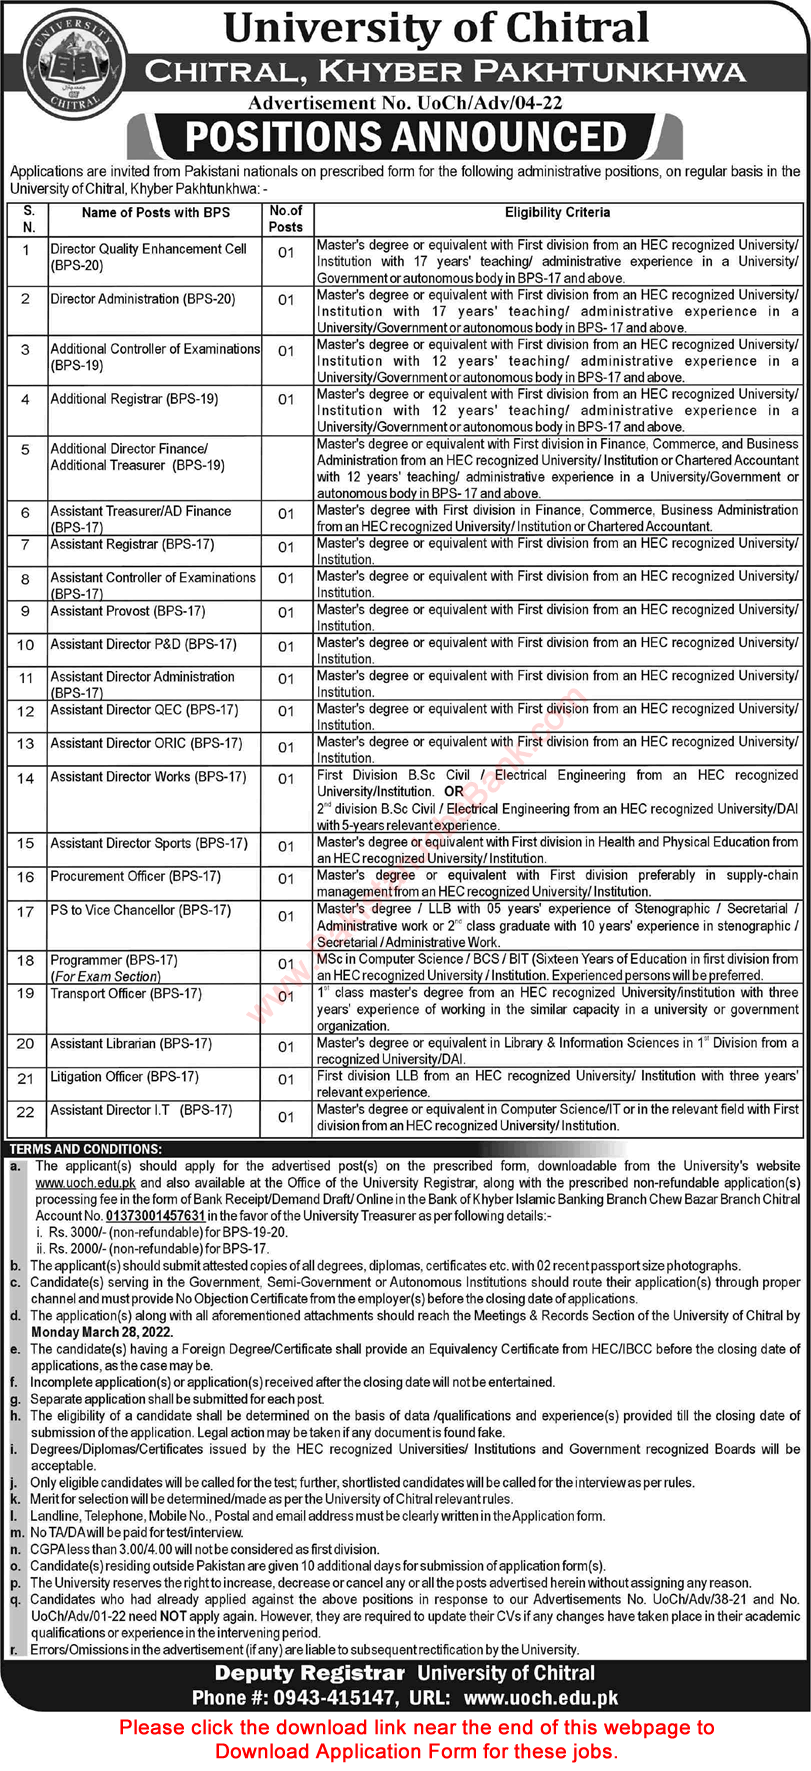 University of Chitral Jobs March 2022 Application Form Assistant Directors & Others Latest